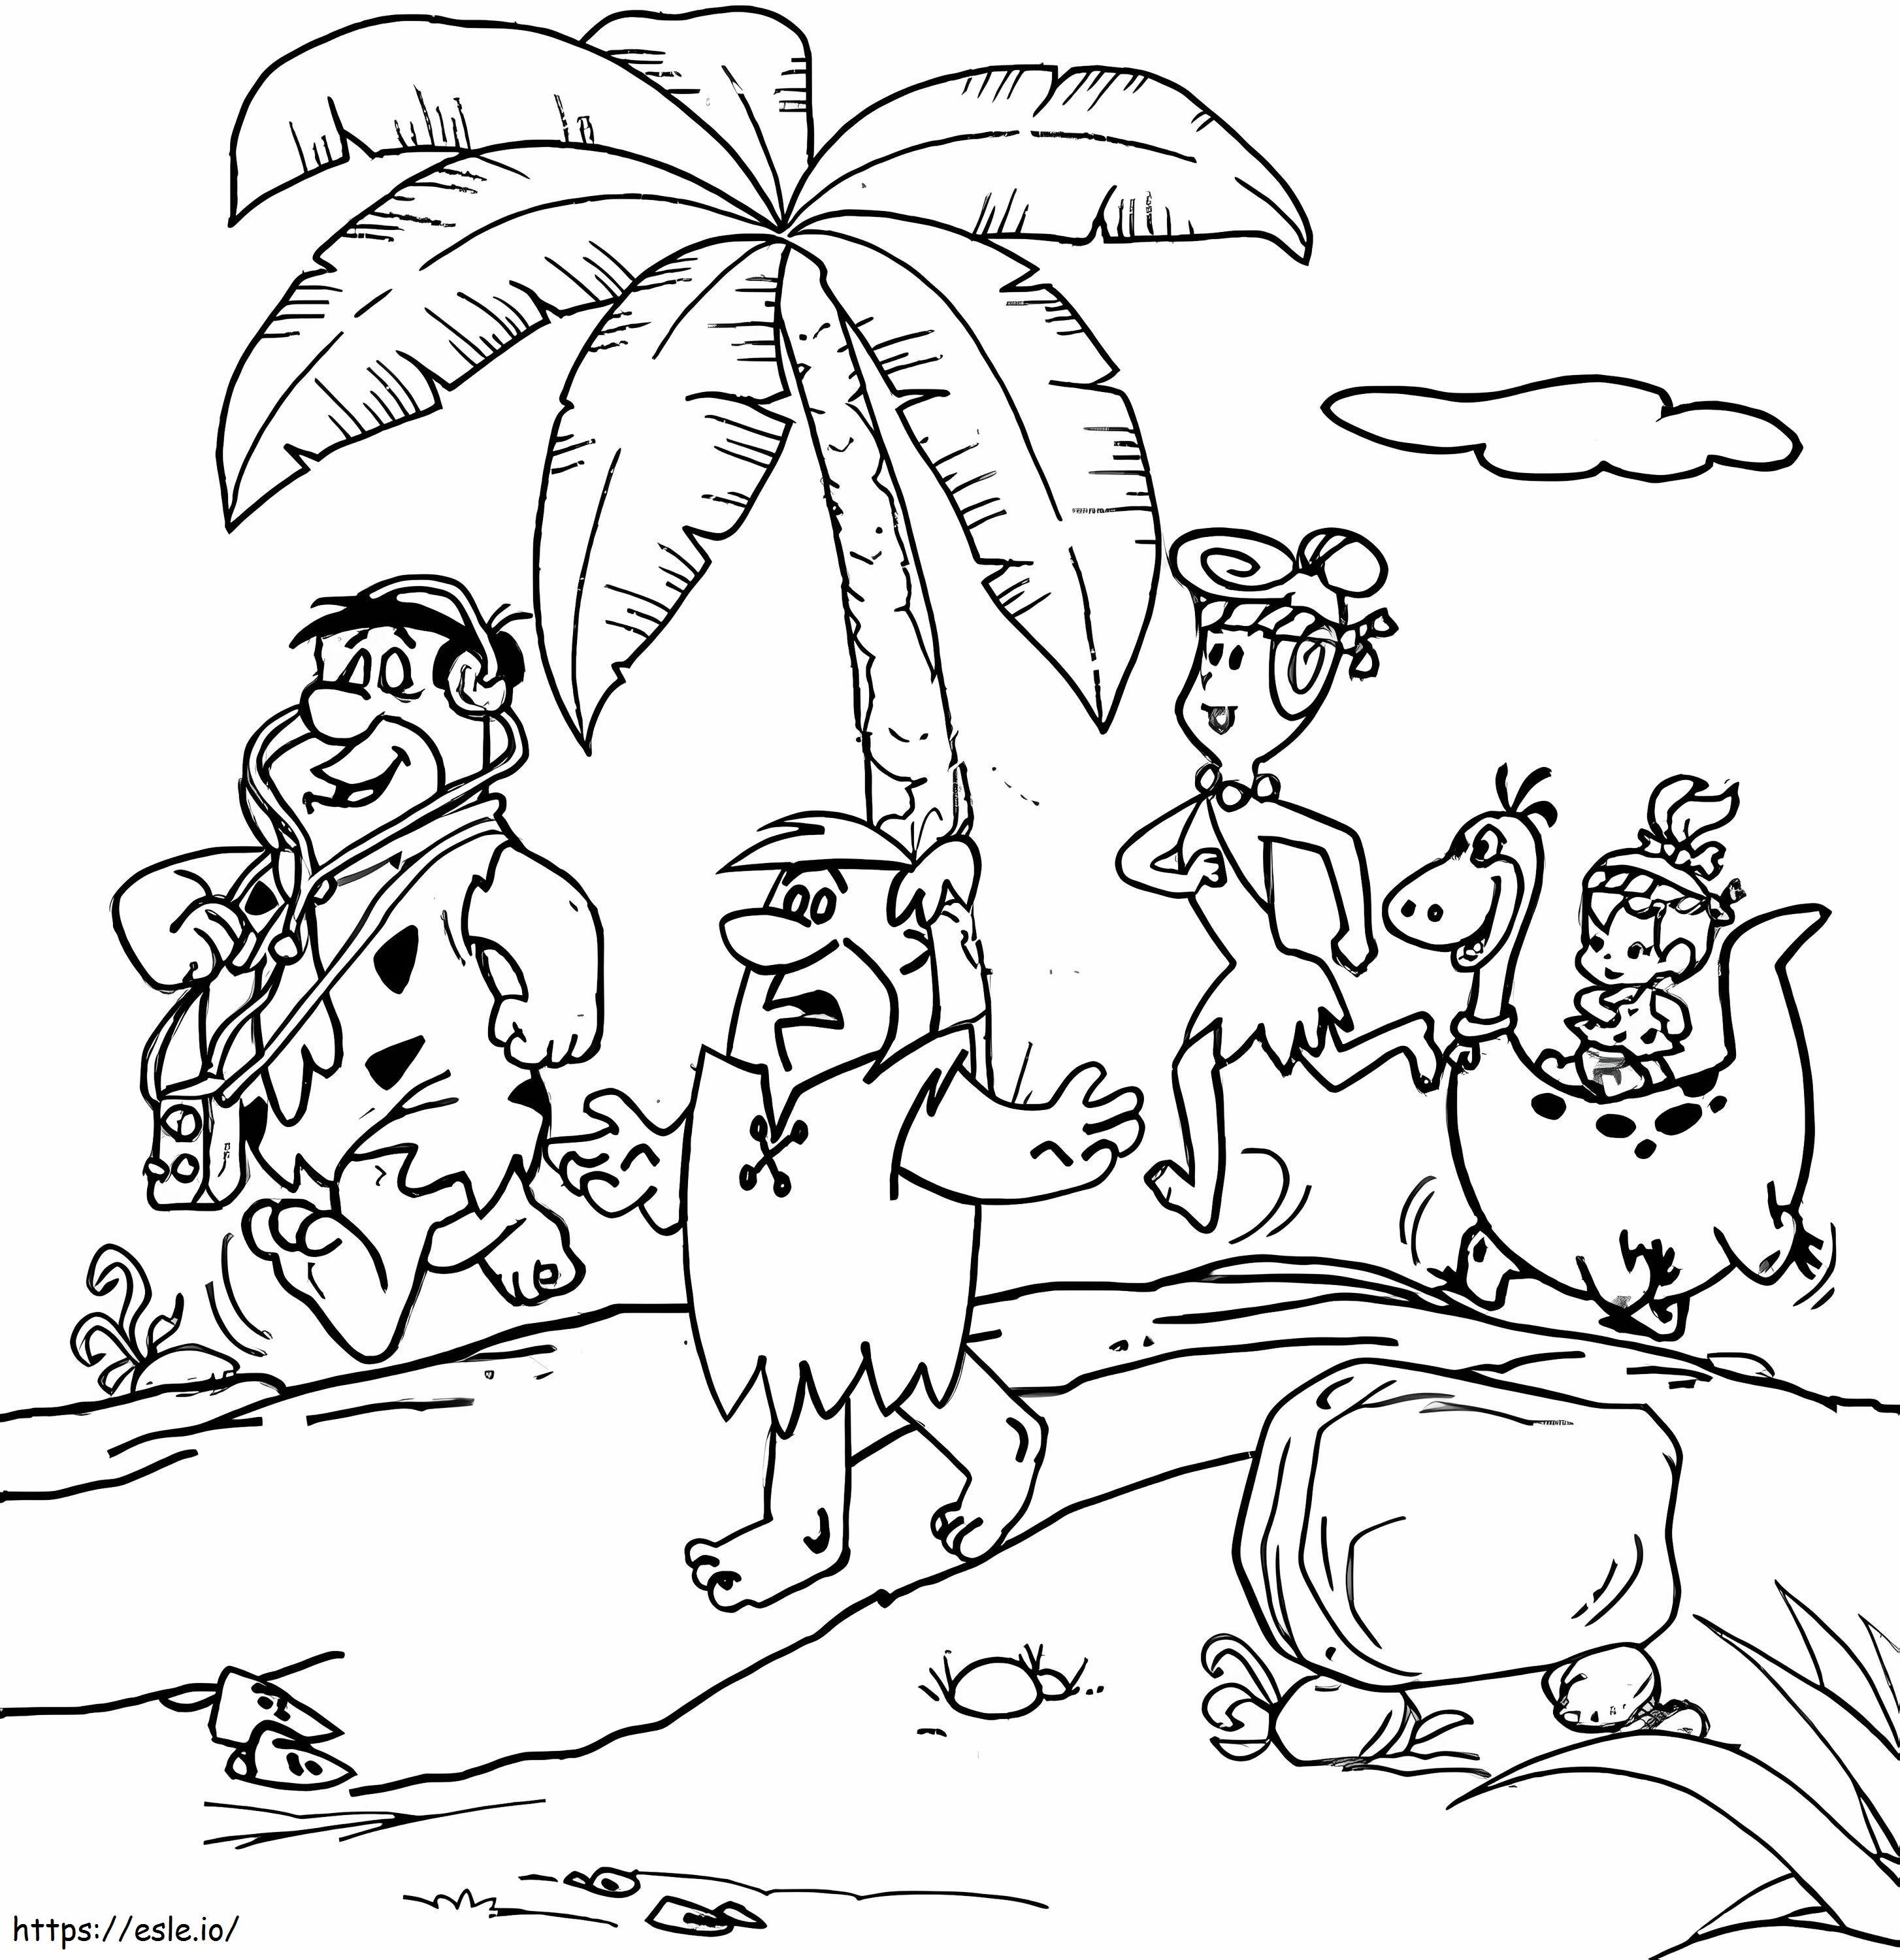 Cavemans On The Beach coloring page